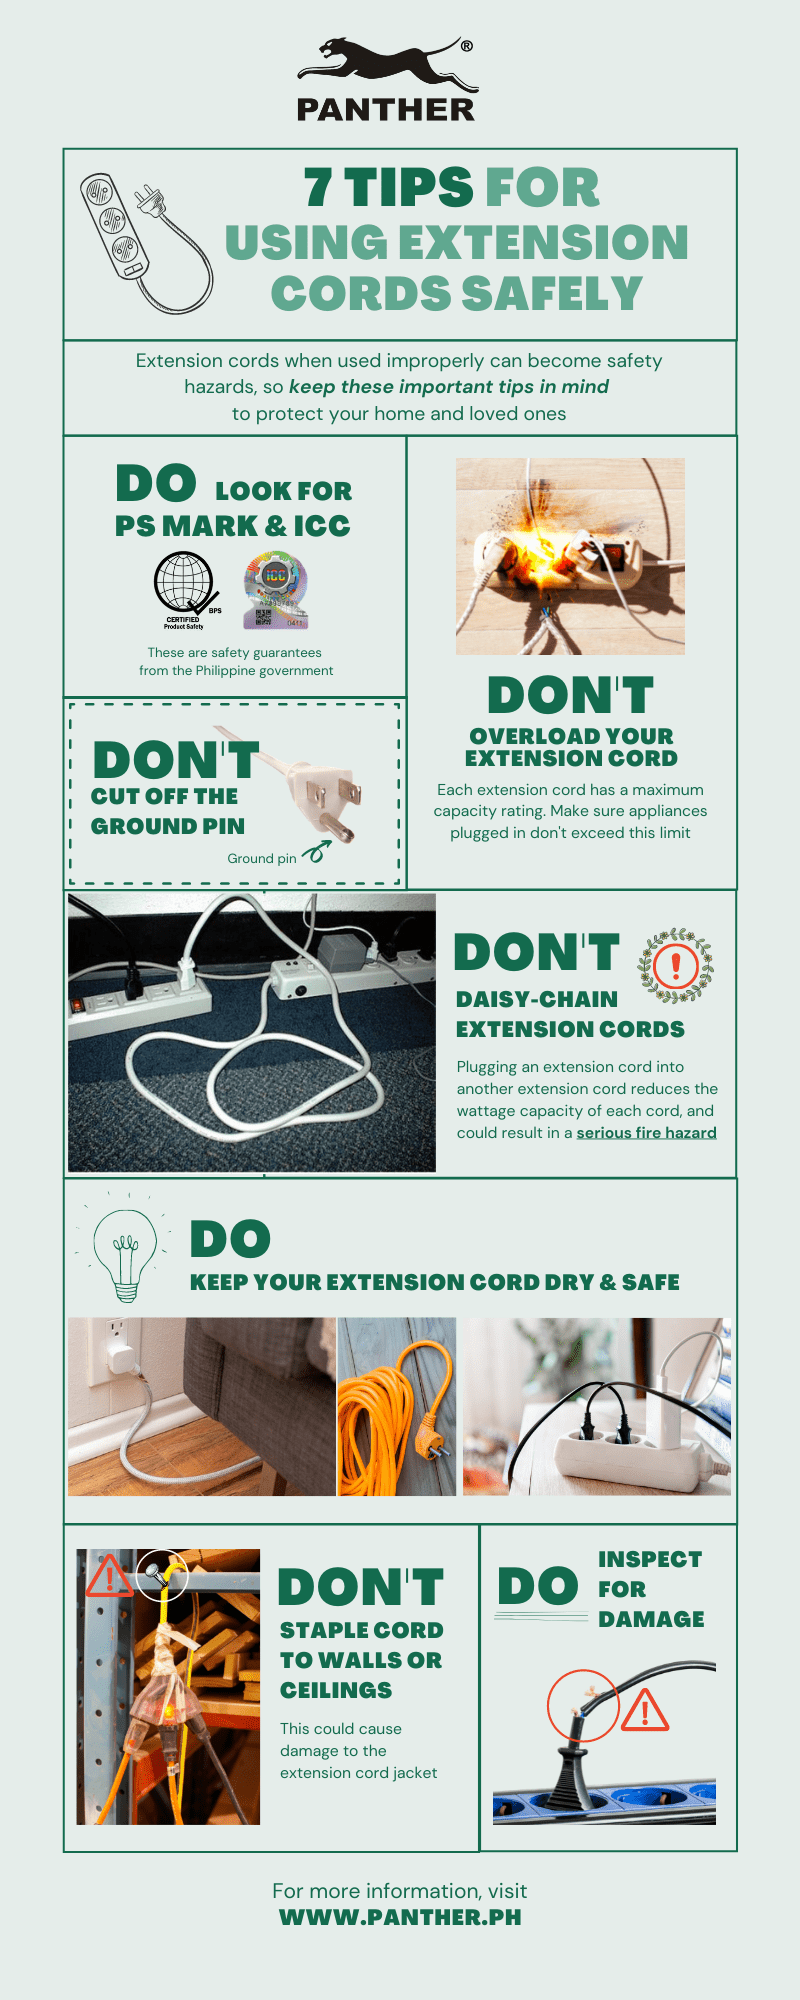 7 Tips on How to Use Extension Cords Safely by a leading extension